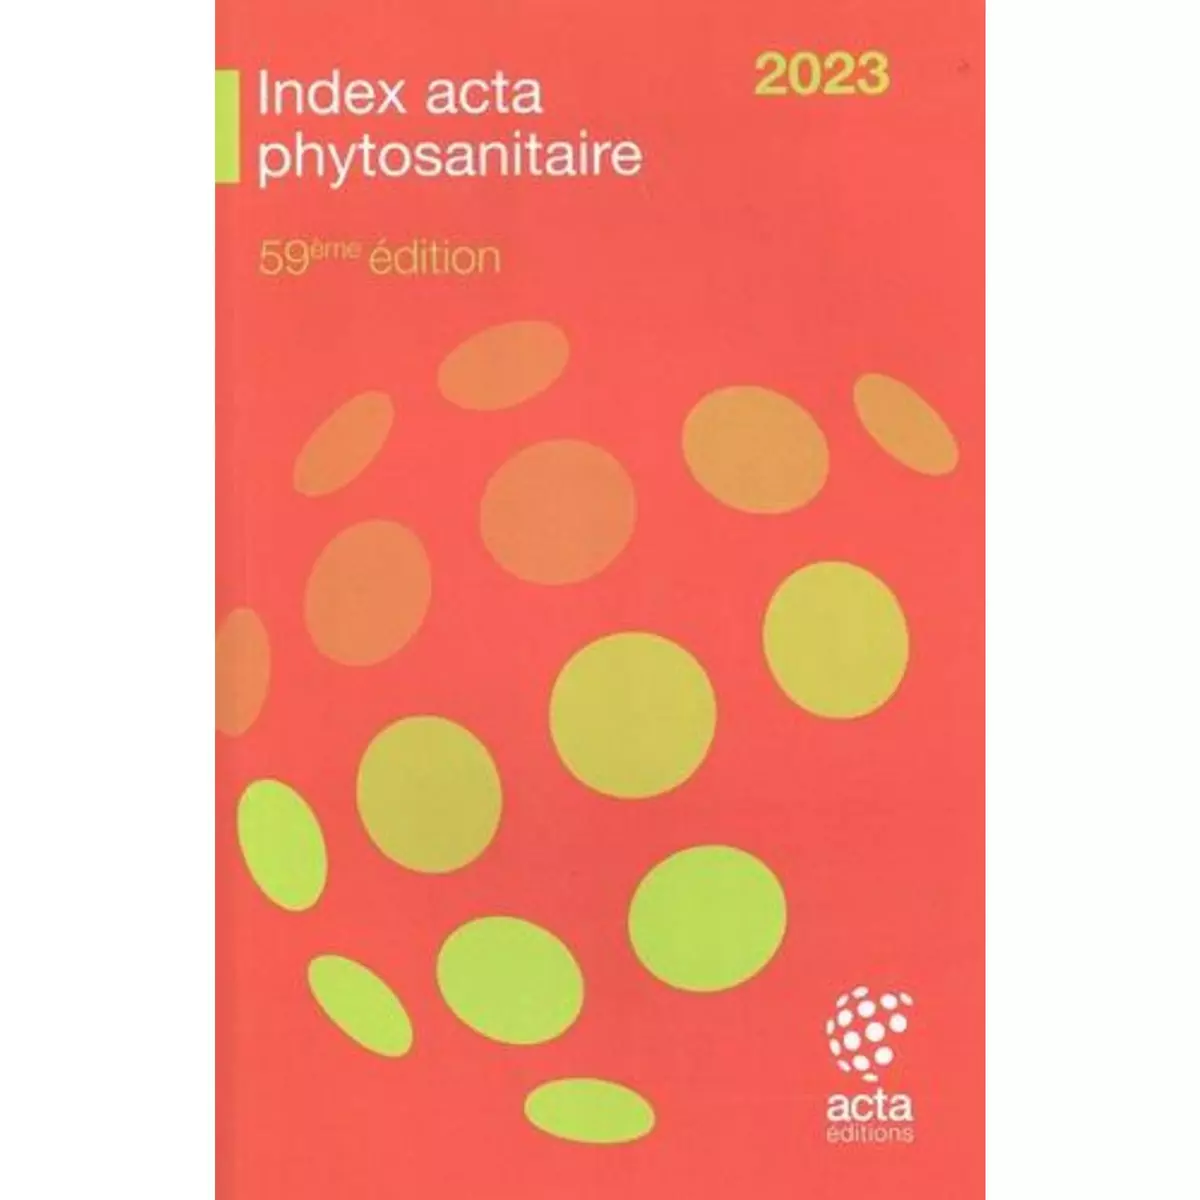  INDEX ACTA PHYTOSANITAIRE. EDITION 2023, Charbonnier Edwige